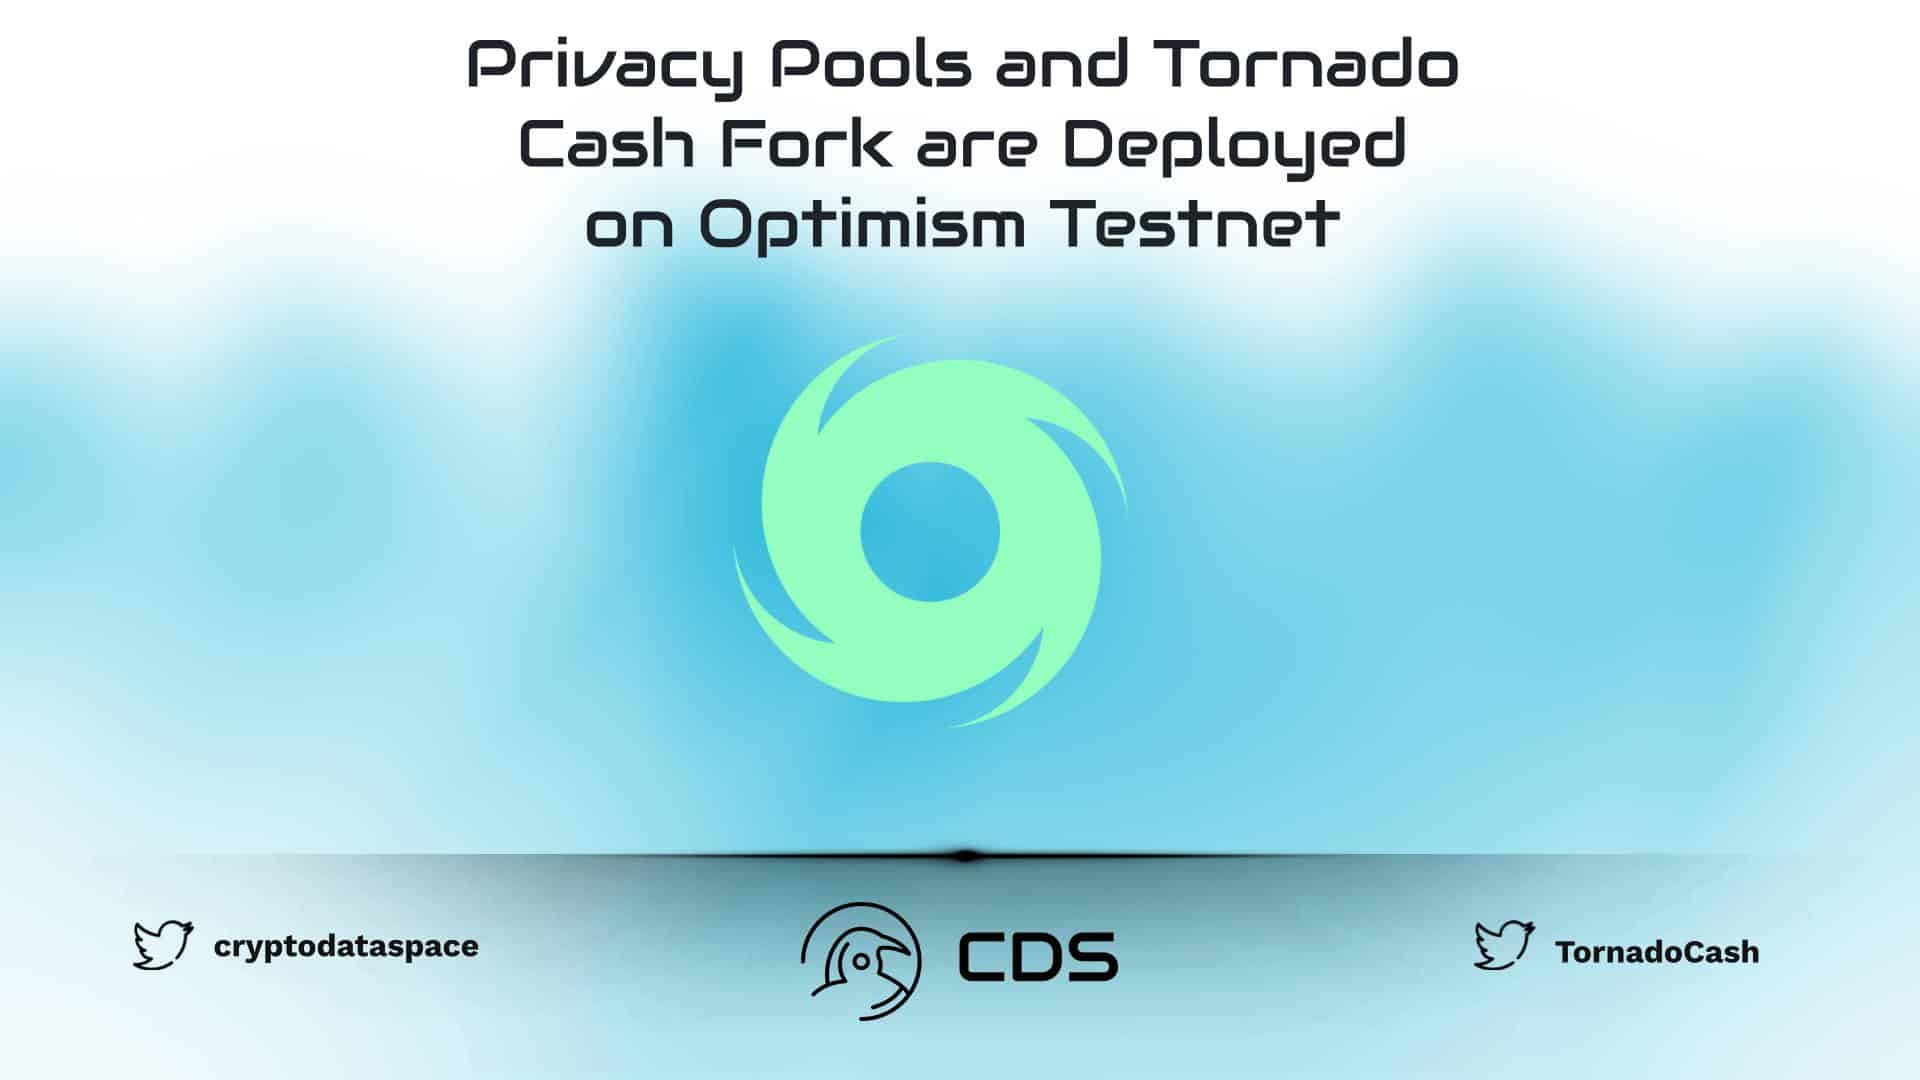 Privacy Pools and Tornado Cash Fork are Deployed on Optimism Testnet